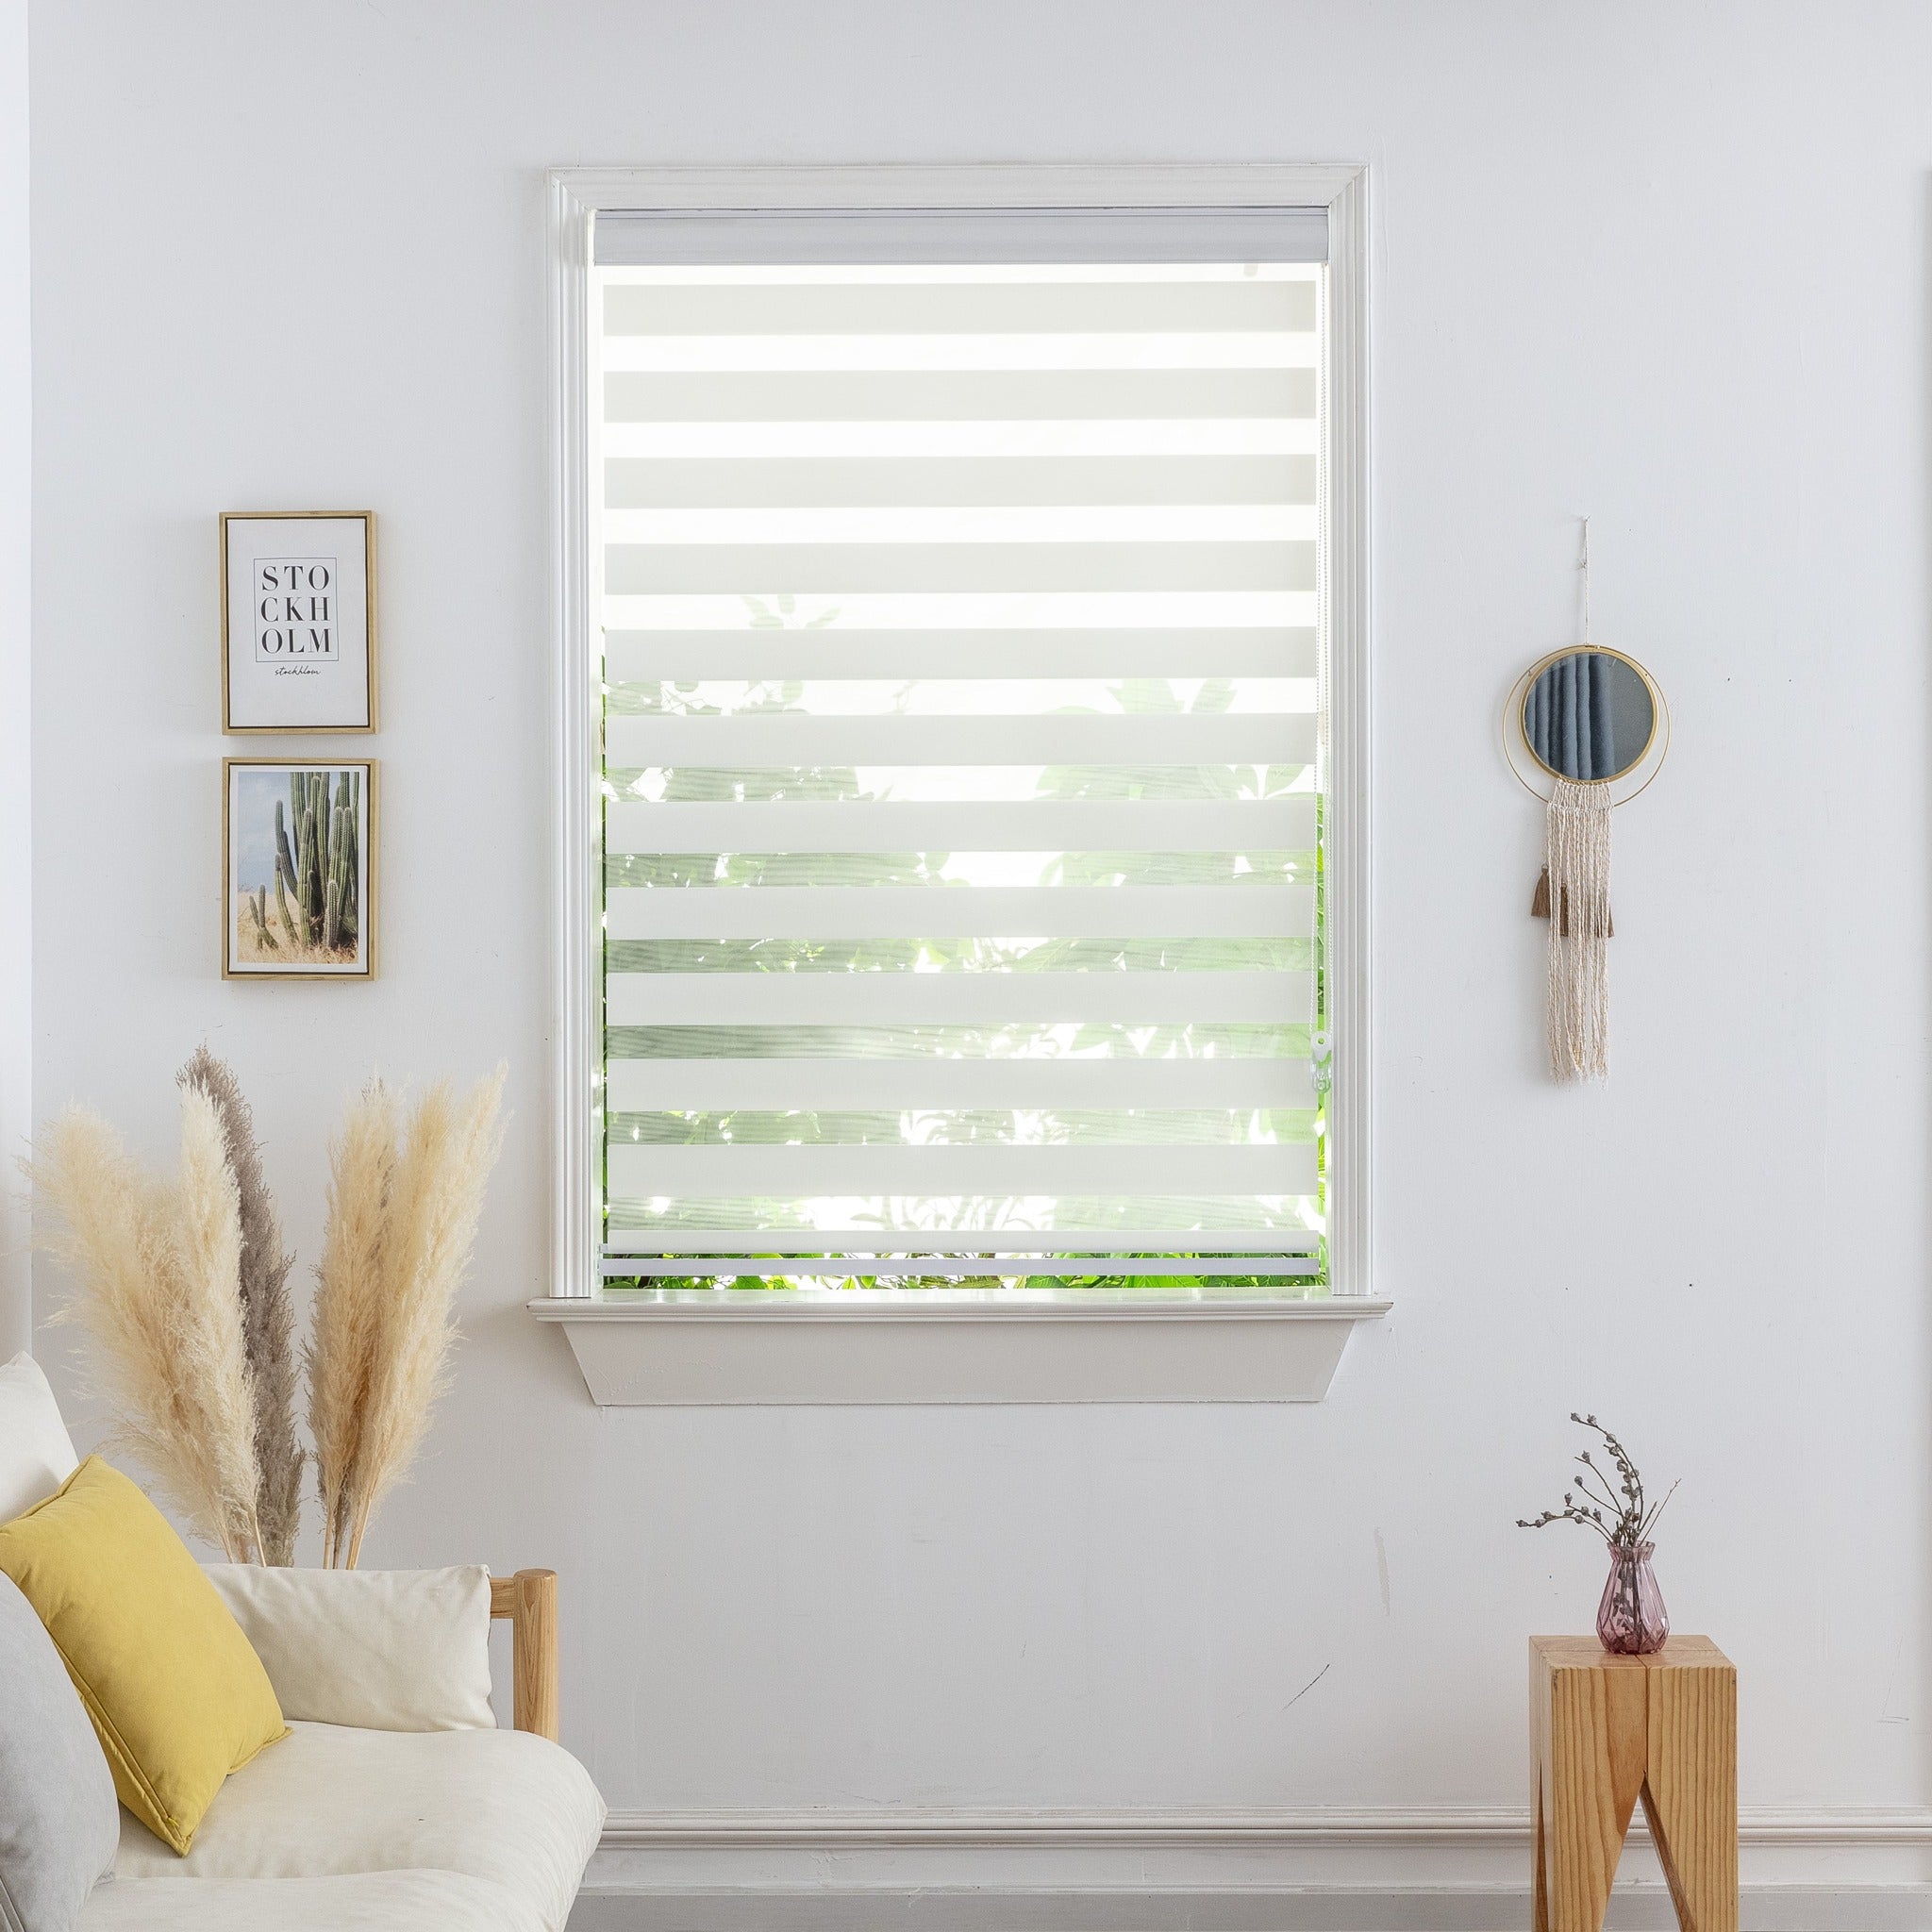 S3-003 Light Filtering Zebra Blind Dual Shade - Water Proof